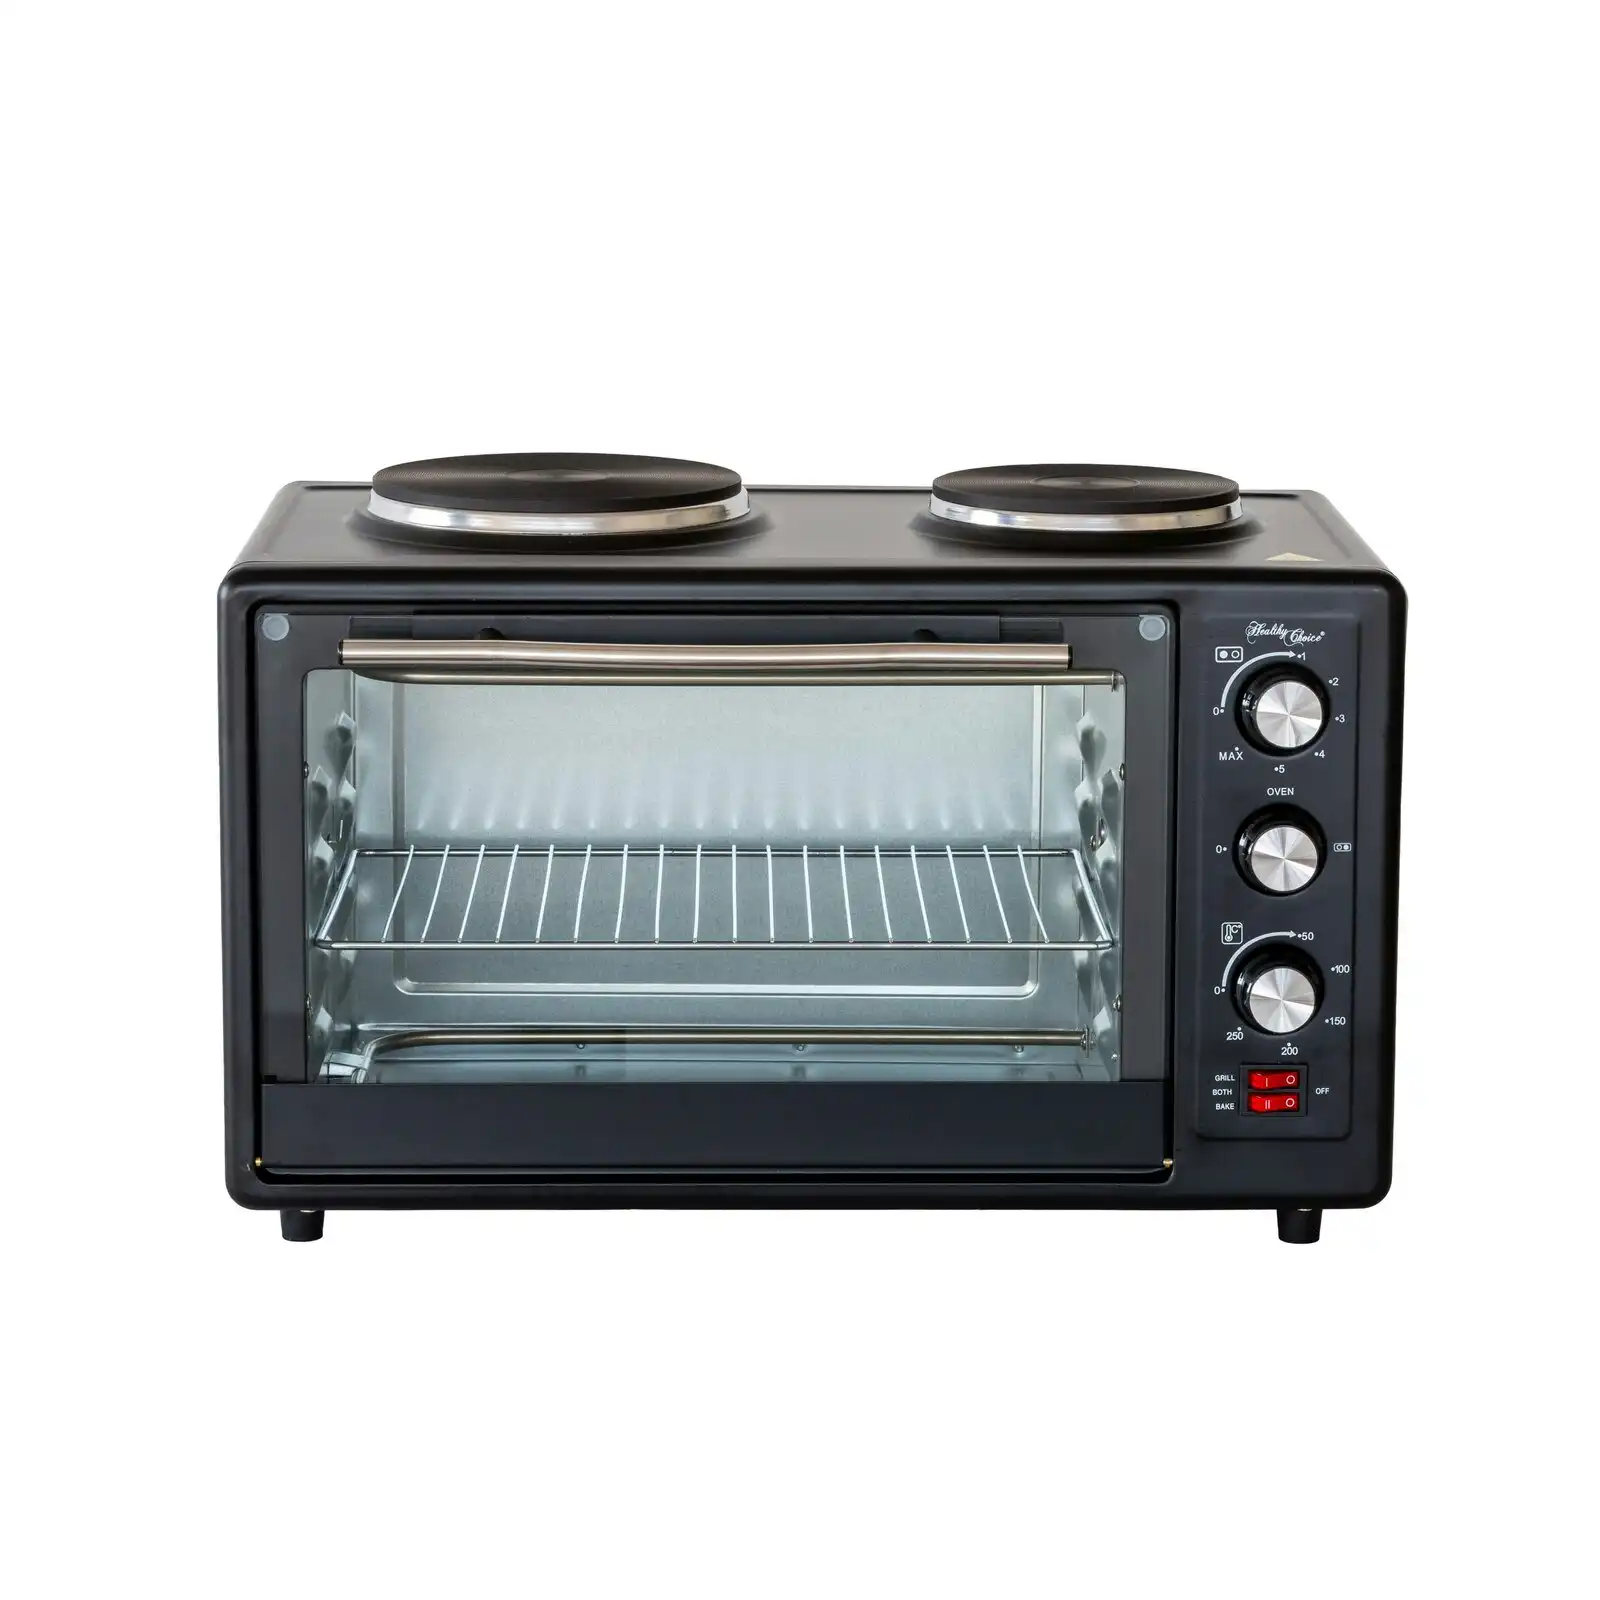 Portable Oven with Rotisserie Cooking, 34L Capacity, 2400W